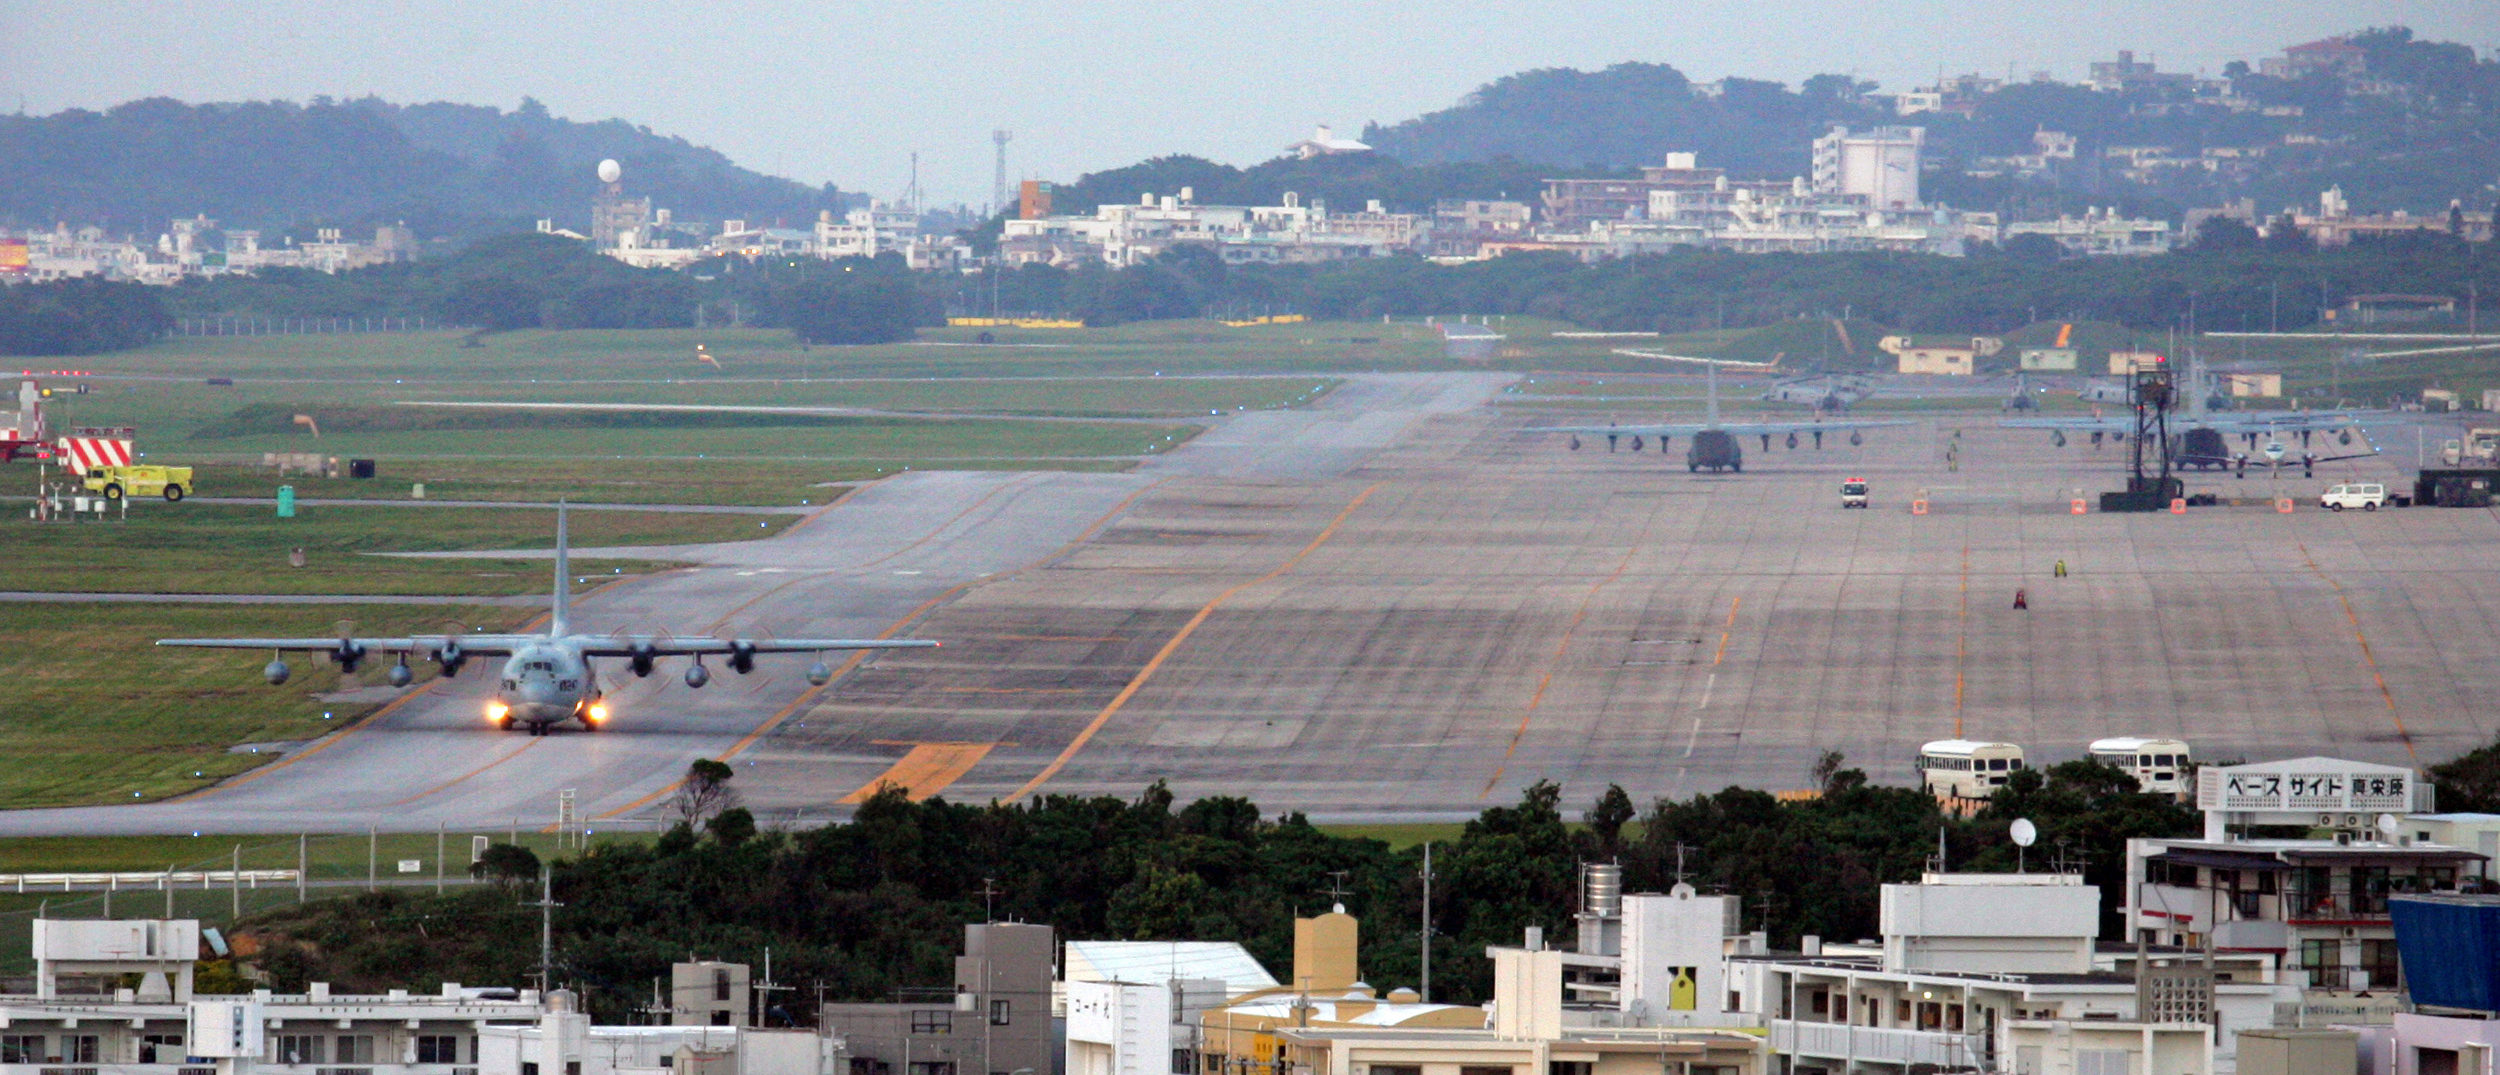 The U.S. military maintains military bases in Japan, including many on Okinawa, according to various sources. A KC-130 Hercules transport plane taxis after returning to the U.S. Futenma air base in Ginowan on the southern Japanese island of Okinawa March 30, 2006. (REUTERS/Issei Kato)